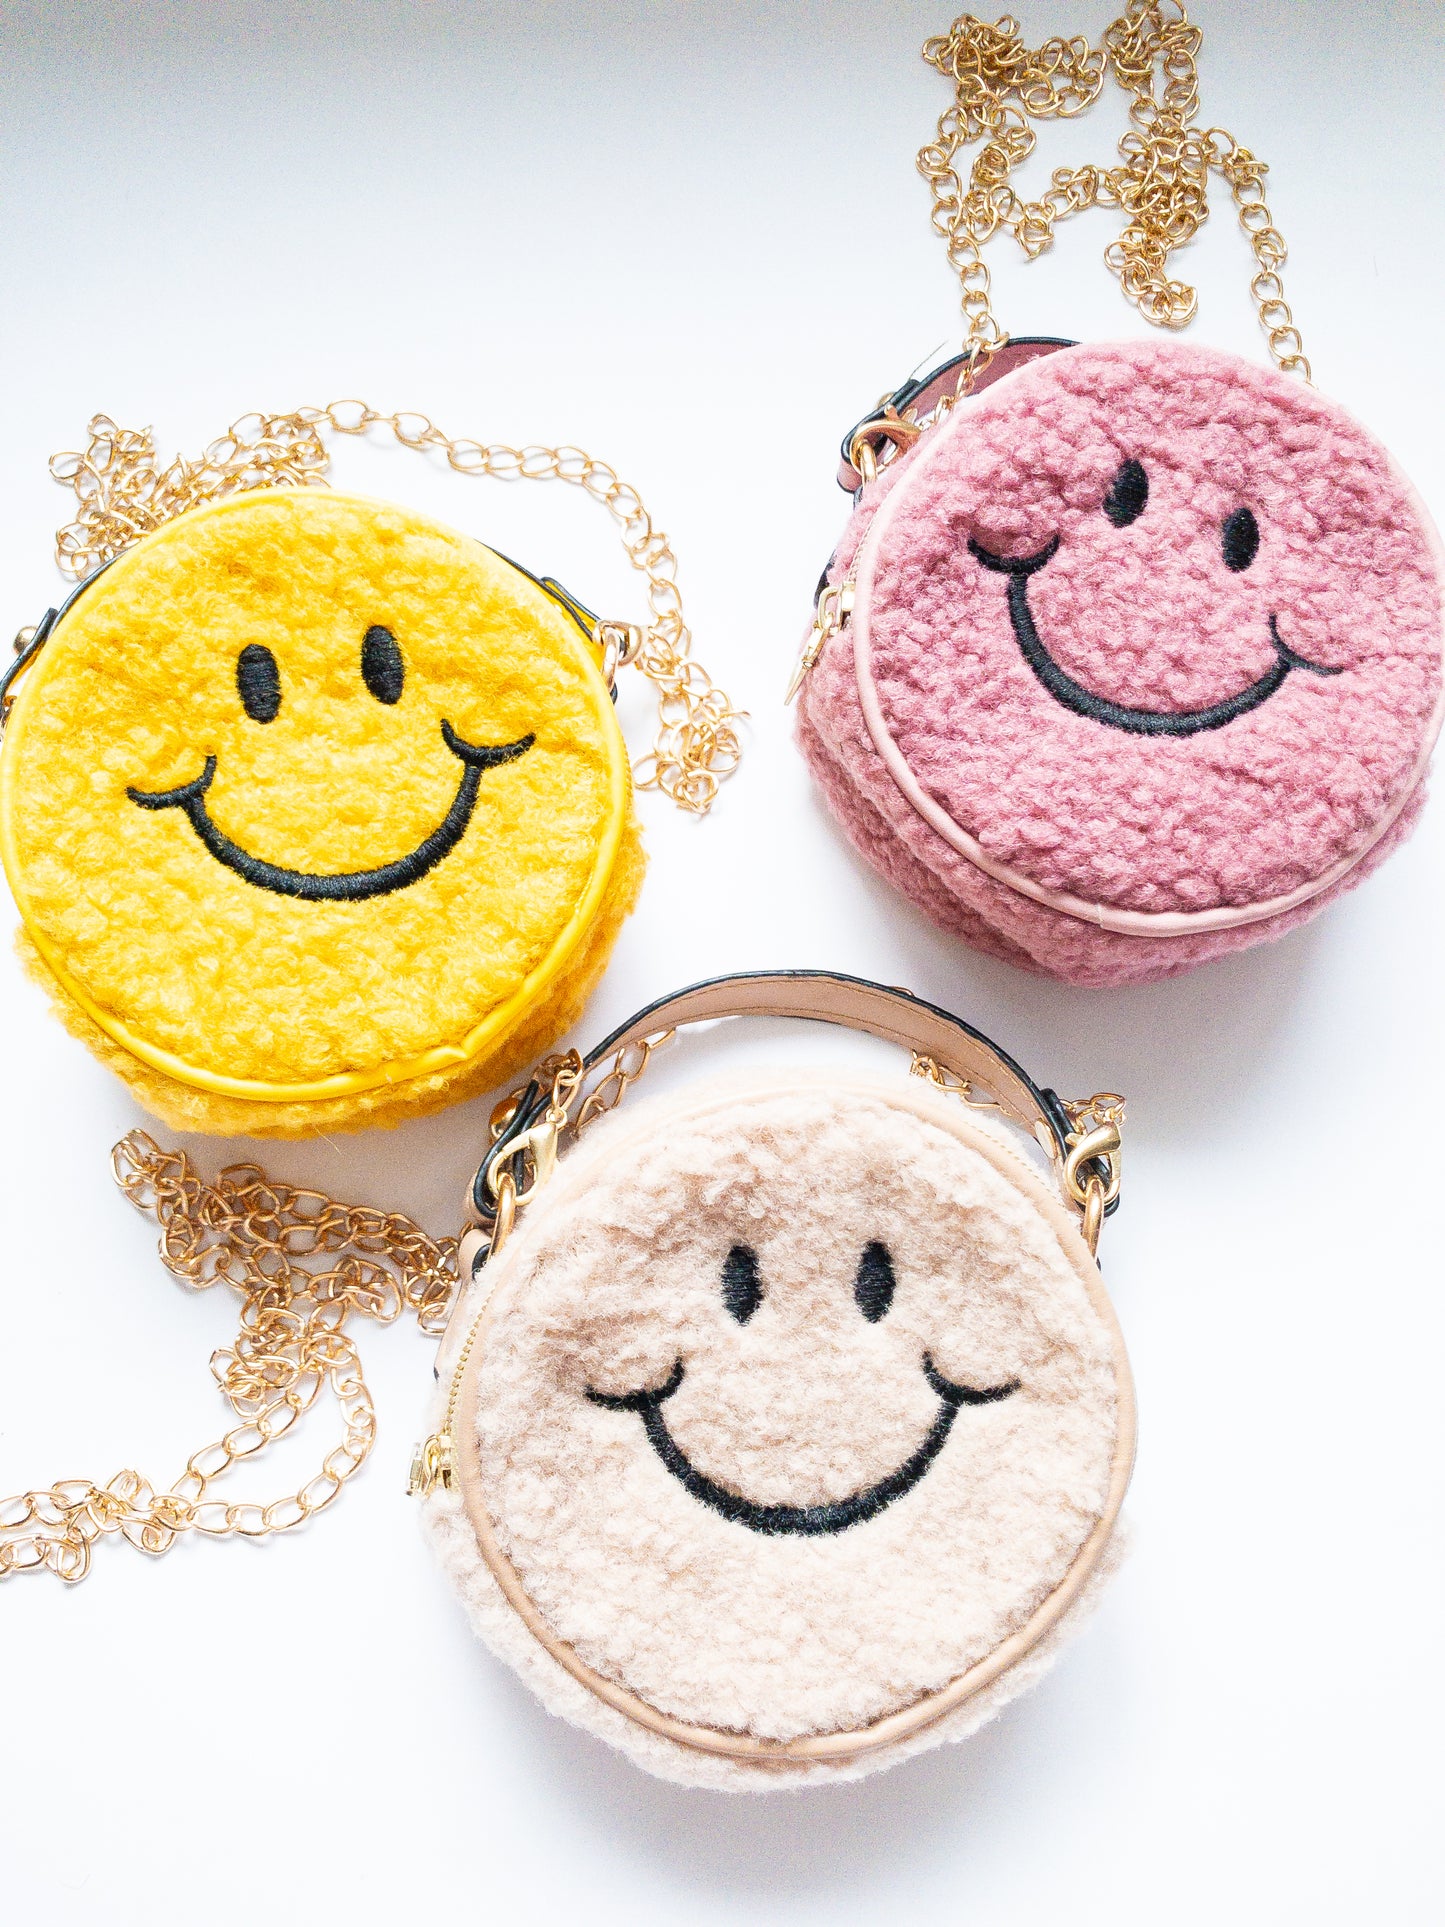 The cutest smiley face bag! This little purse is fuzzy and happy with a single zip open. It has a small open pocket in the back and a short vegan leather handle. The gold chain strap is removable. Choose from 3 cute colors.